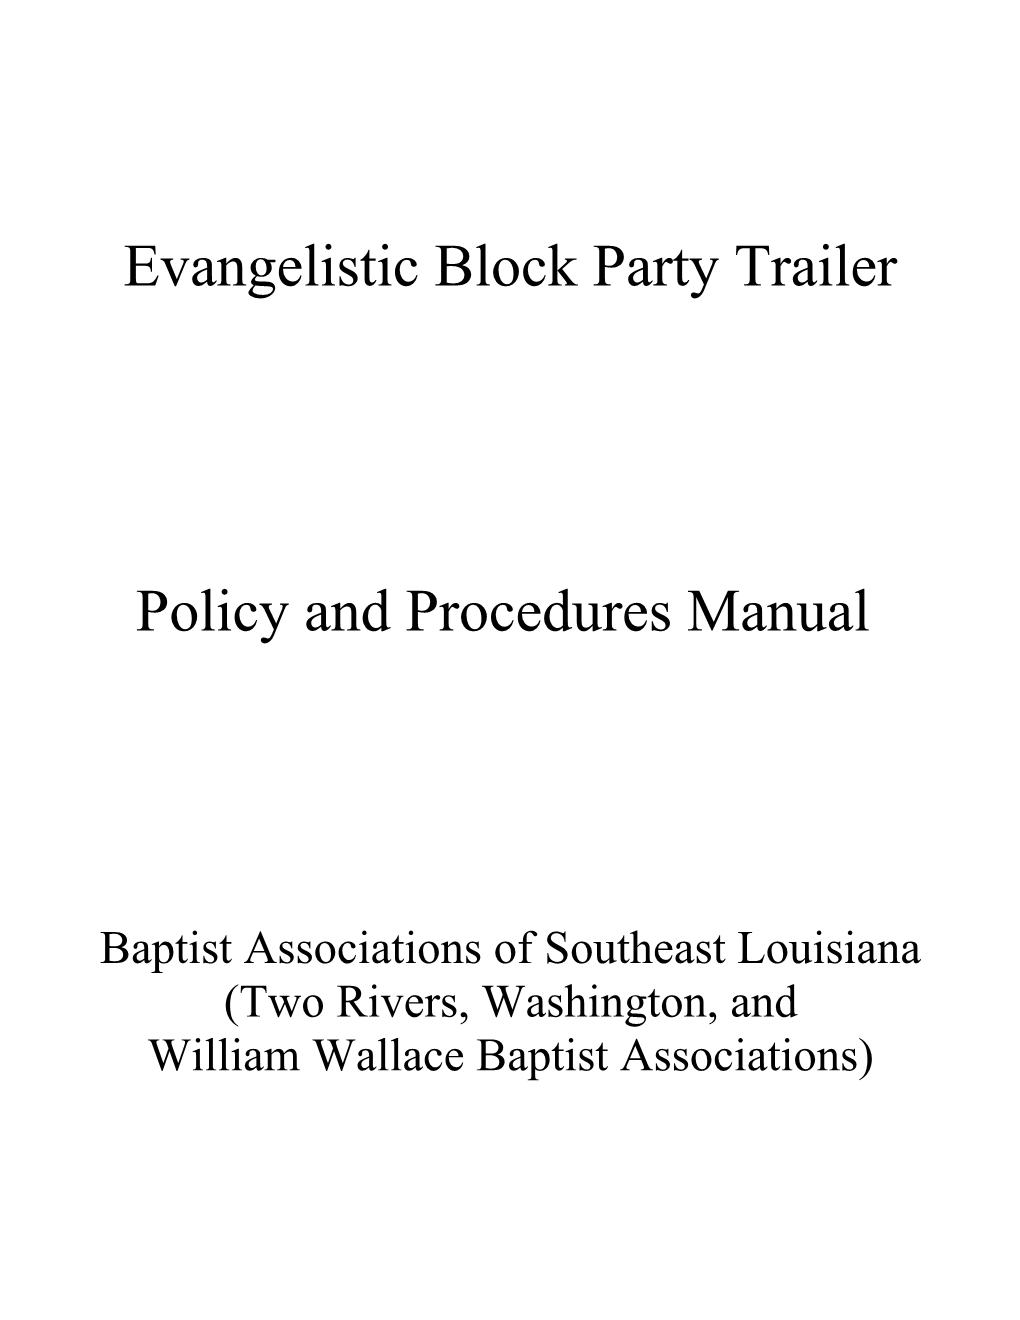 The Evangelistic Block Party Trailer Is a Ministry Provided by the Baptist Associations